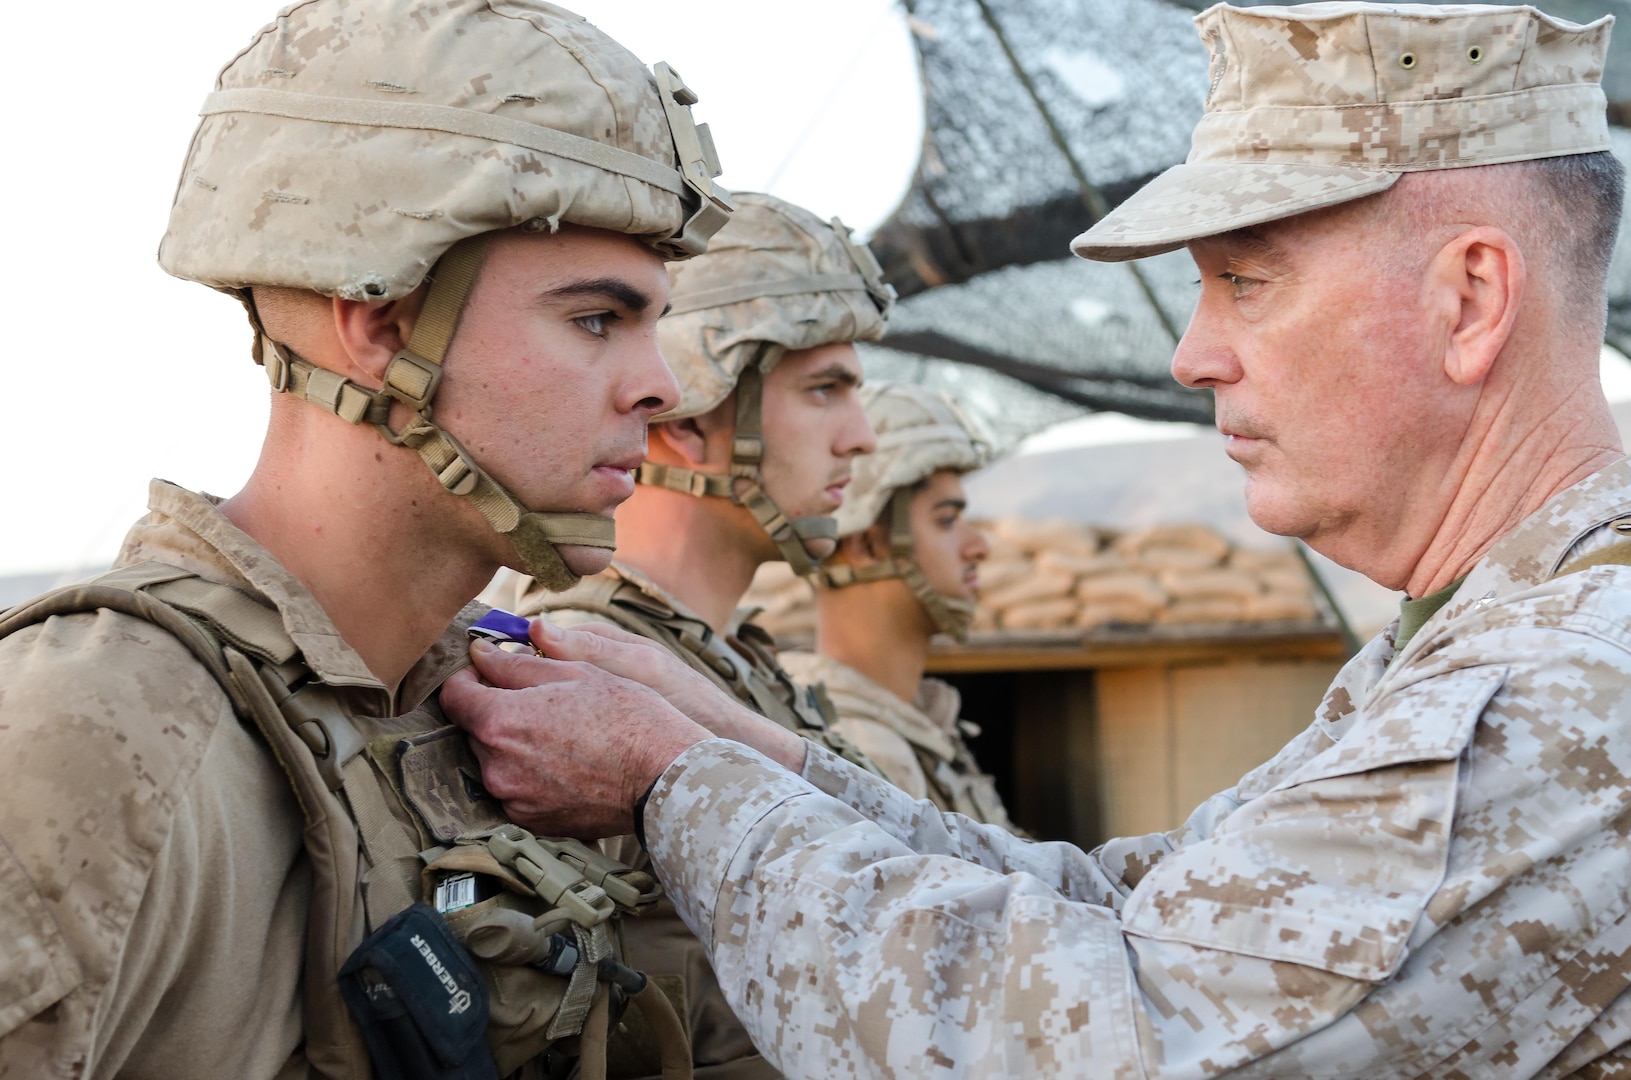 Chairman of the Joint Chiefs of Staff Gen. Joseph Dunford presents U.S. Marine Cpl. Adam J. Seanor, a native of Montgomery, Pennsylvania, with the Purple Heart during a ceremony at Kara Soar Base, Makhmur, Iraq, April 22, 2016. Seanor, a field artillery cannon crewman assigned to Battery E, 26th Marine Expeditionary Unit, was awarded his Purple Heart at the very site he was wounded March 19. (U.S. Army Photo by Staff Sgt. Peter J. Berardi)